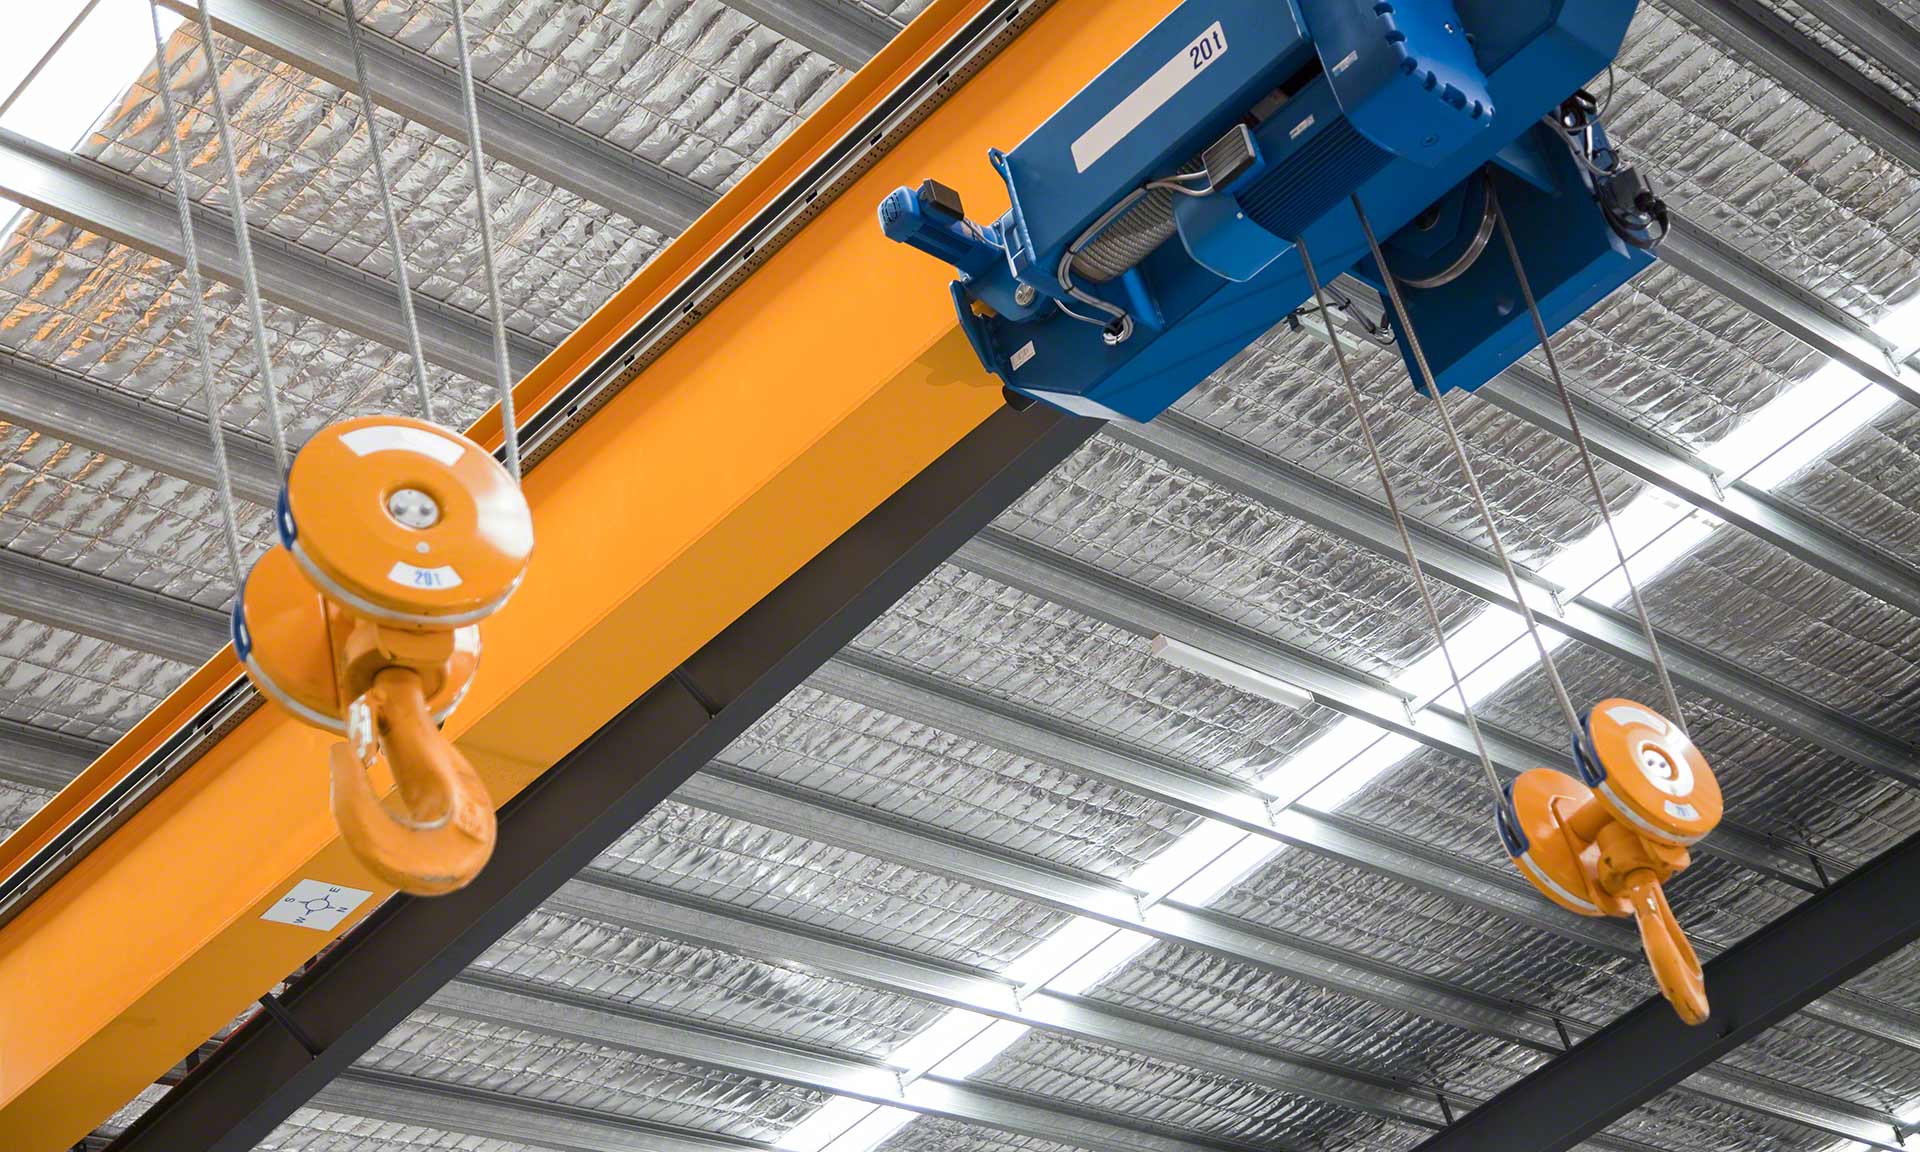 Hoist: definition and function in warehousing